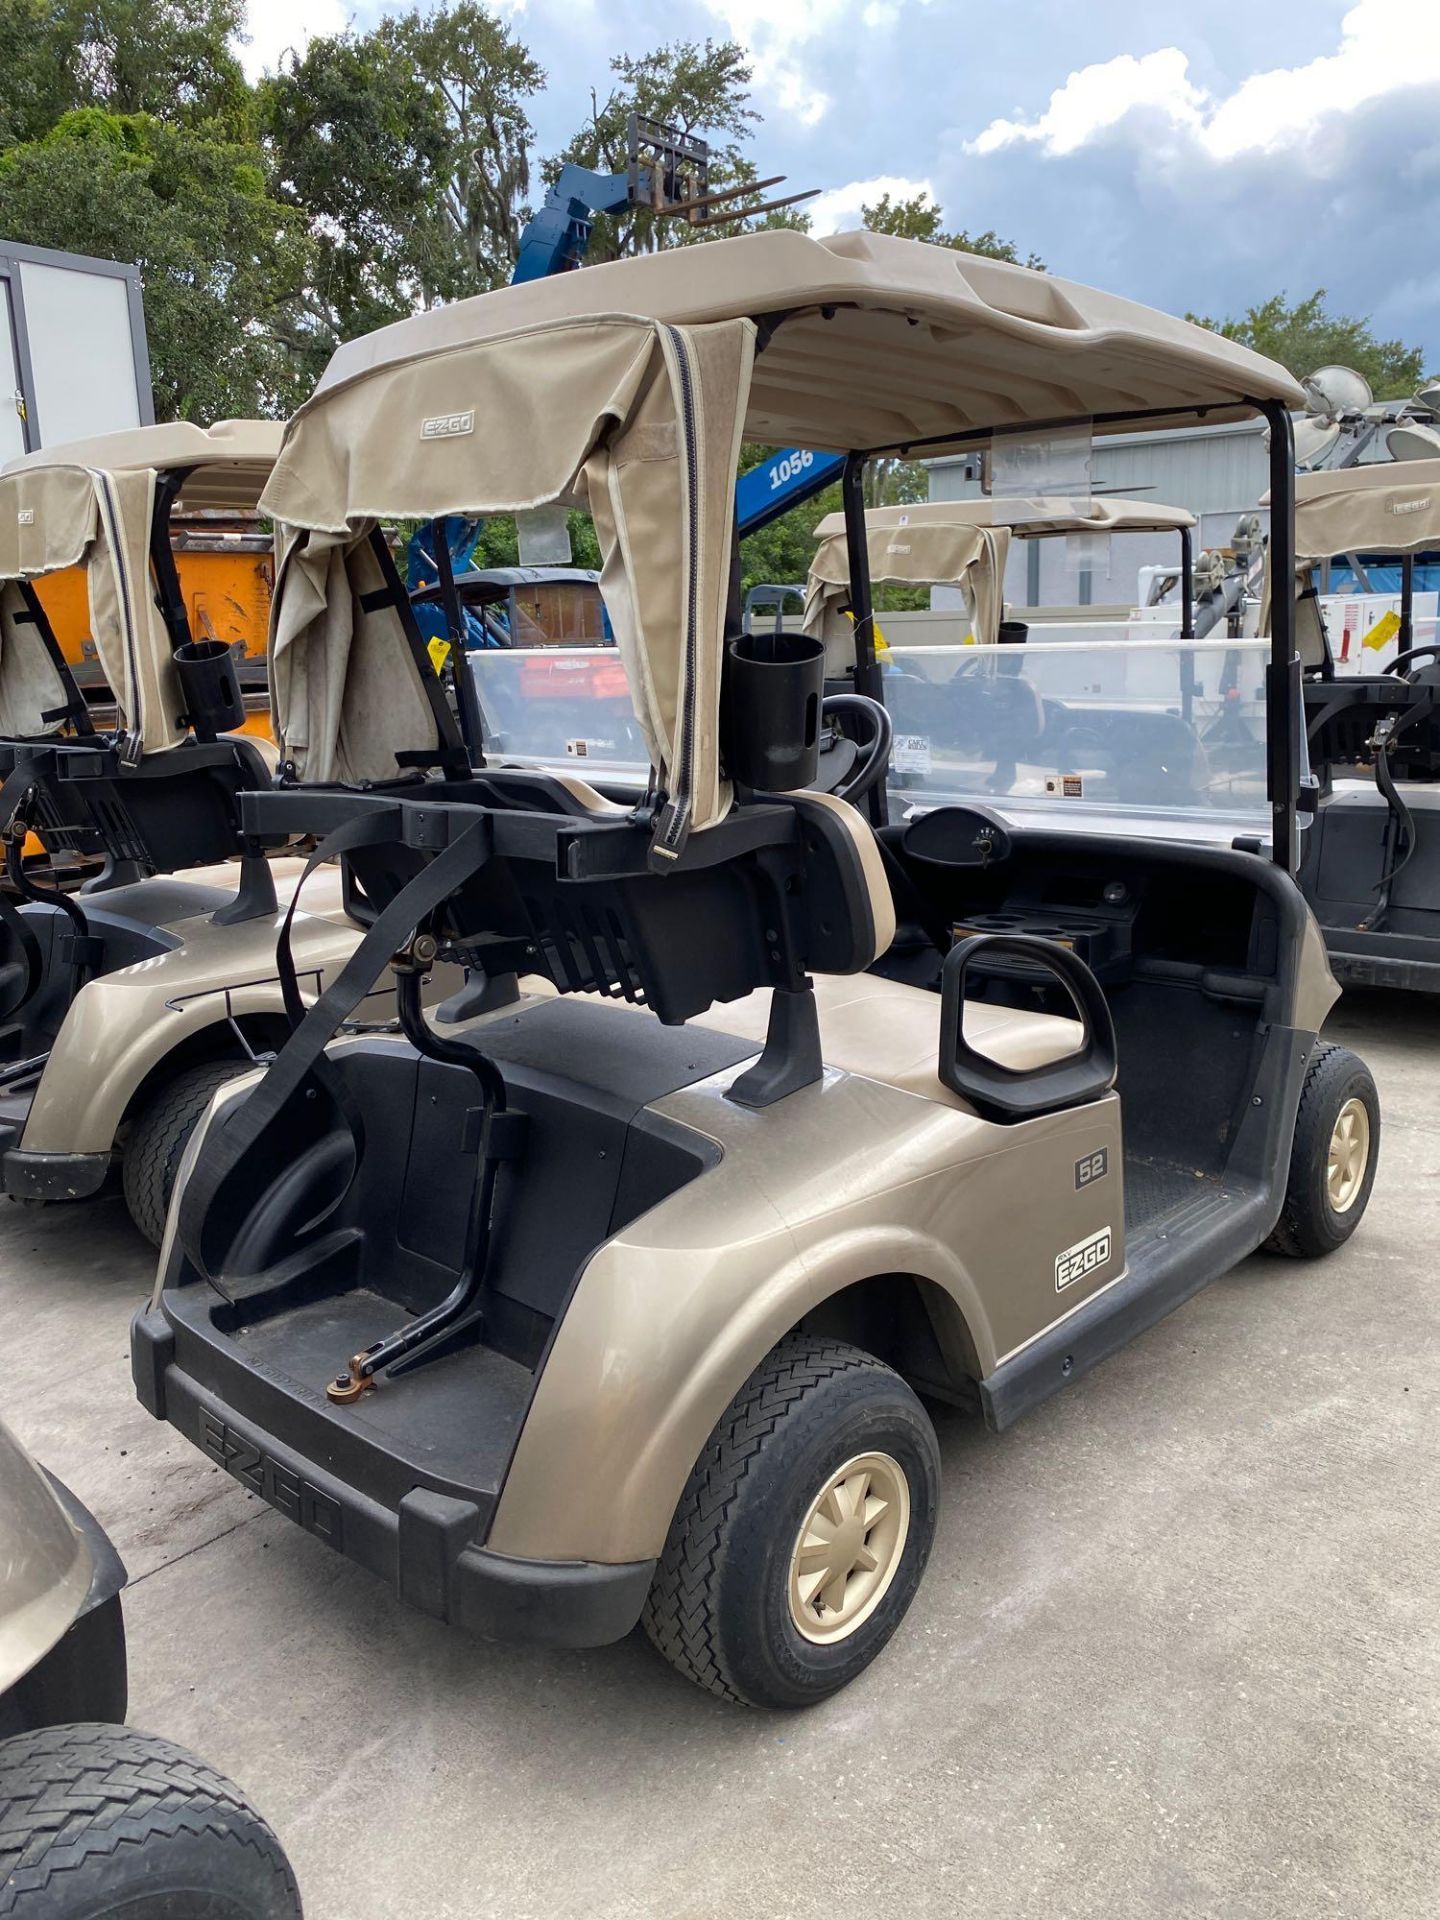 2016 EZ-GO RXV ELECTRIC GOLF CART WITH TROJAN HYDROLINK WATERING SYSTEM BATTERIES, EX-GO DELTA-Q SC- - Image 4 of 5